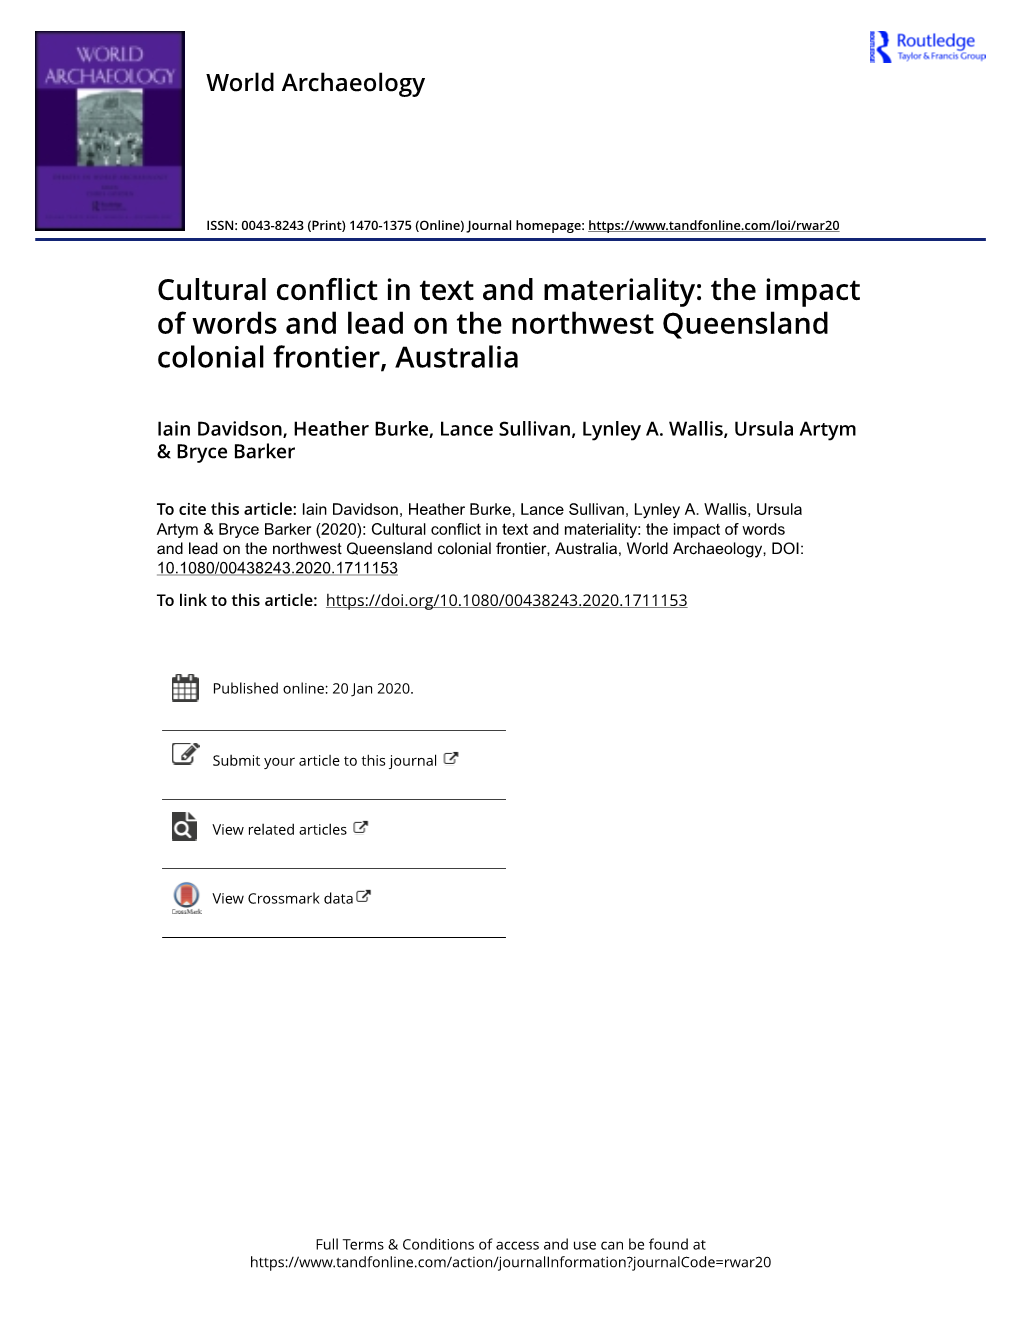 Cultural Conflict in Text and Materiality: the Impact of Words and Lead on the Northwest Queensland Colonial Frontier, Australia